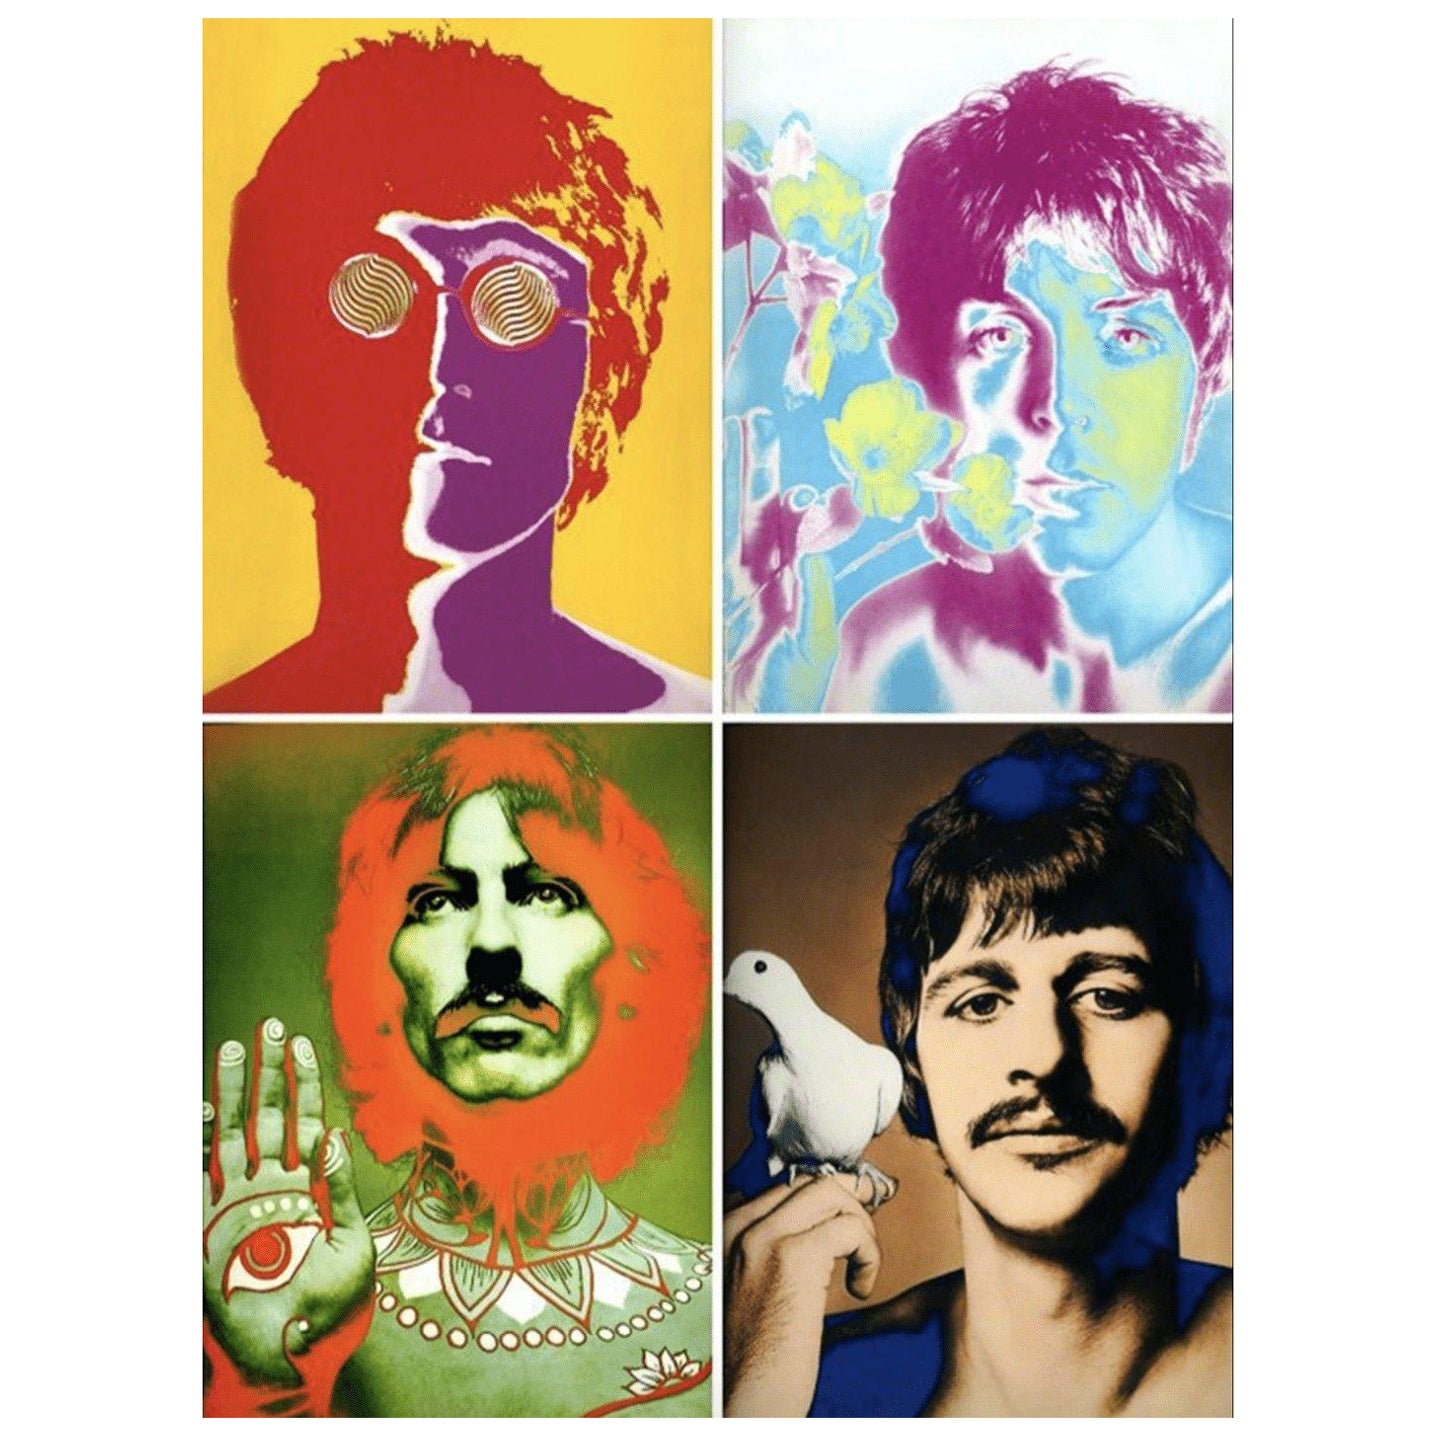 1968 The Beatles by Richard Avedon - Set of 4 Original Vintage Posters For Sale